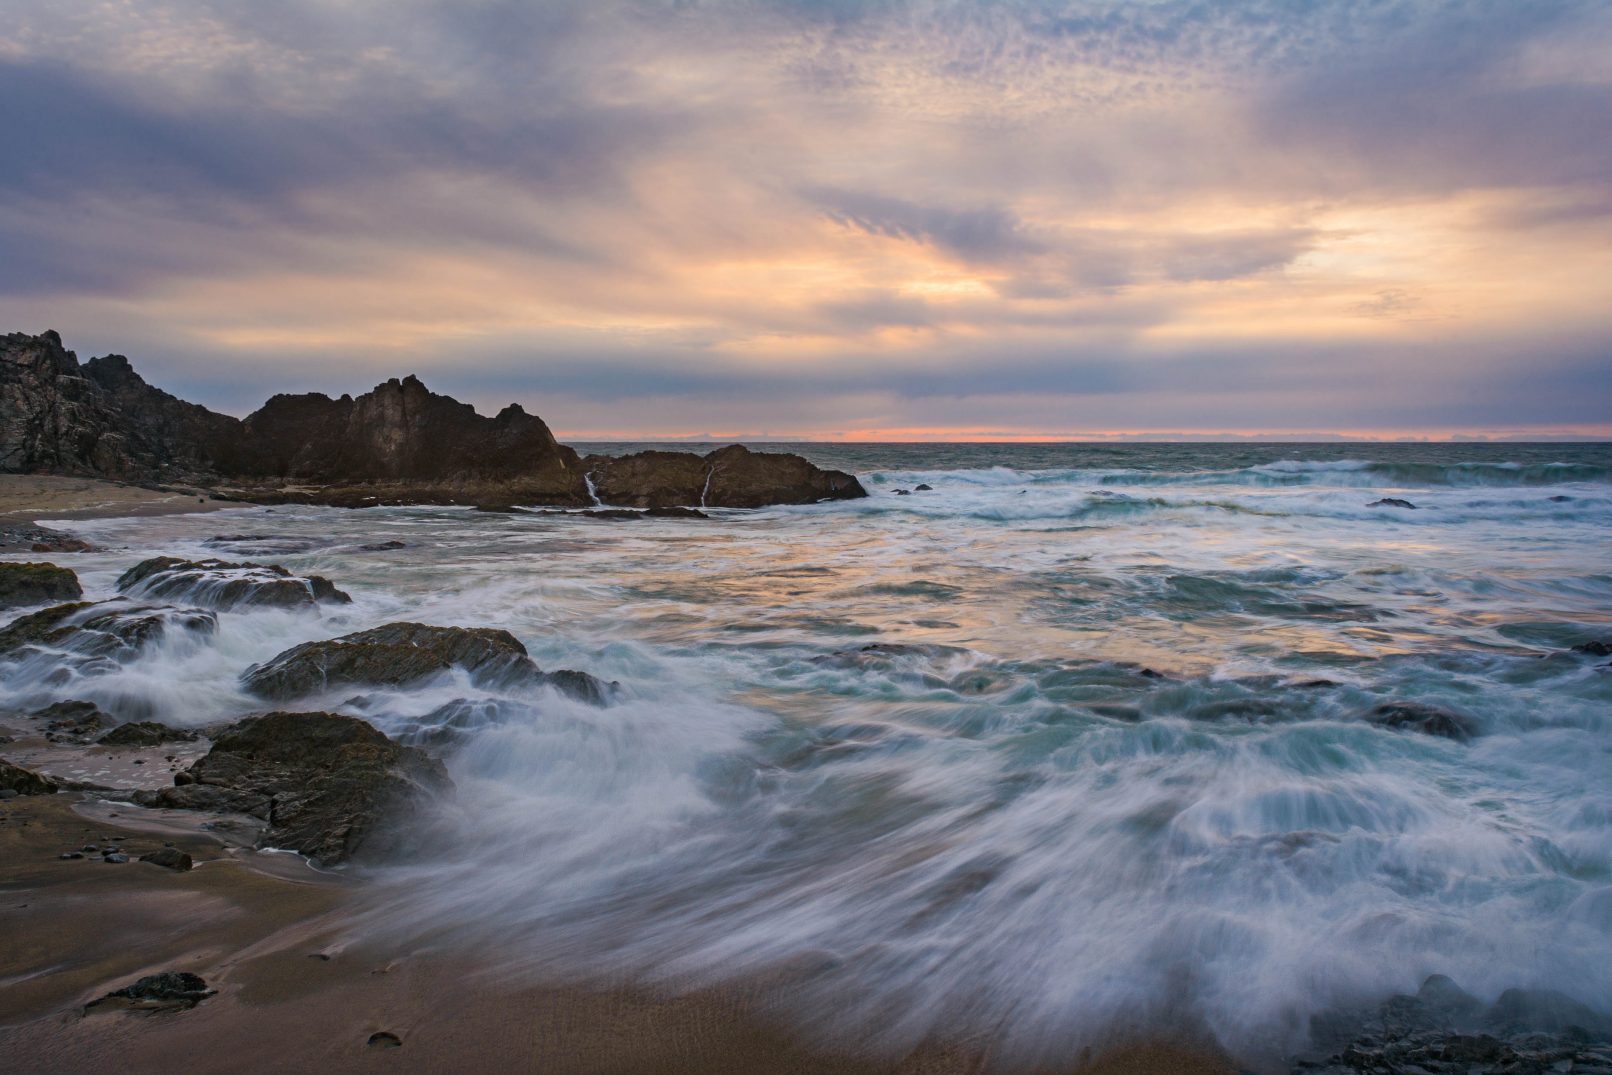 McClure's Beach, California with waves, rocks and sunset